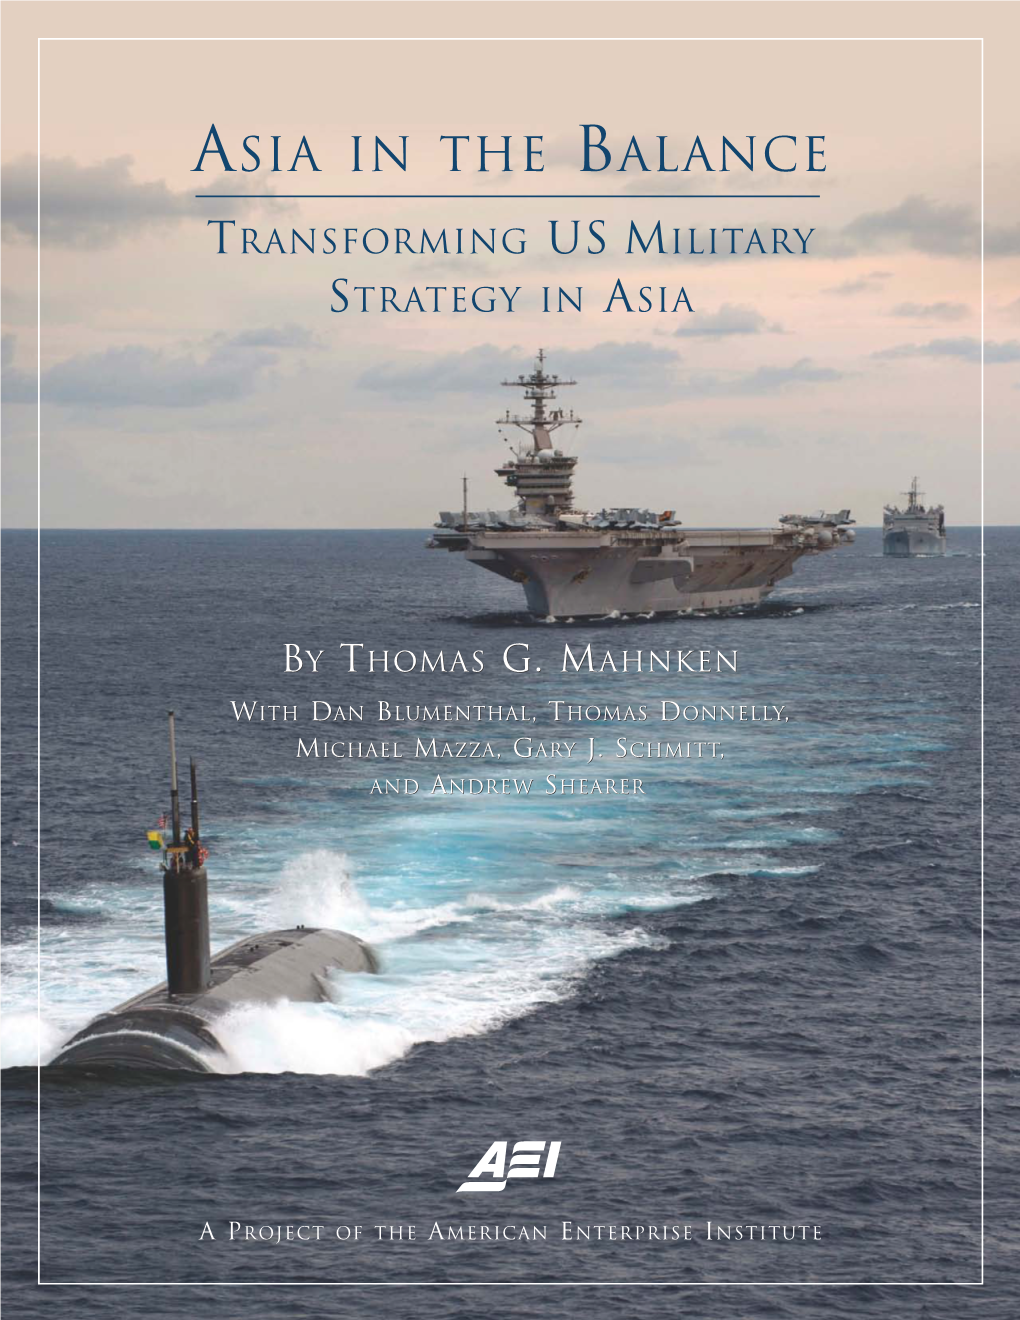 Asia in the Balance: Transforming US Military Strategy in Asia